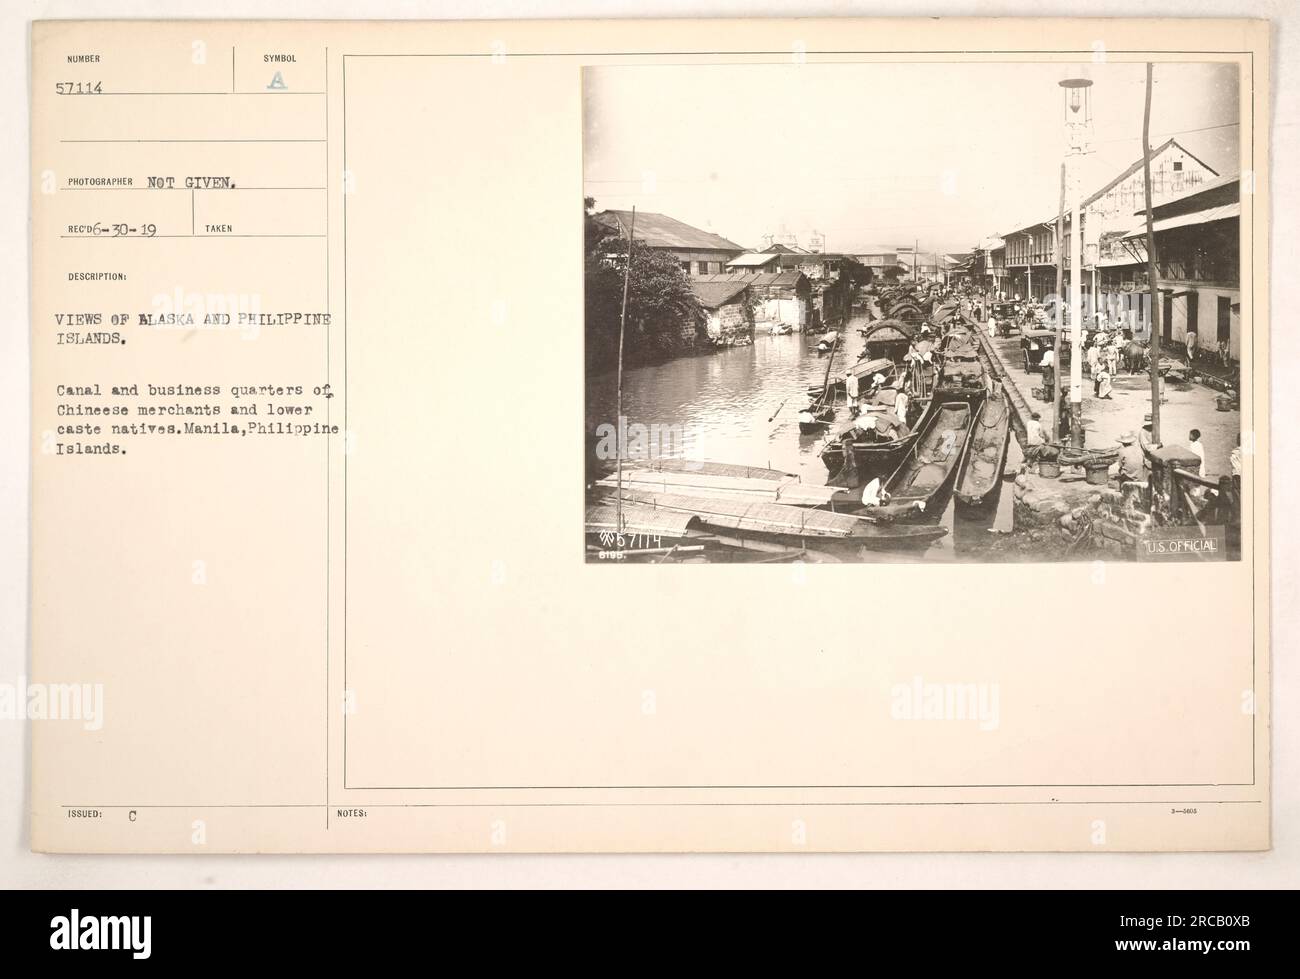 View of canal and business quarters in Manila, Philippine Islands, highlighting Chinese merchant establishments and the living areas of lower caste natives. This photograph is part of a collection showcasing military activities during World War I in Alaska and the Philippine Islands, but the photographer's identity is unknown. Stock Photo